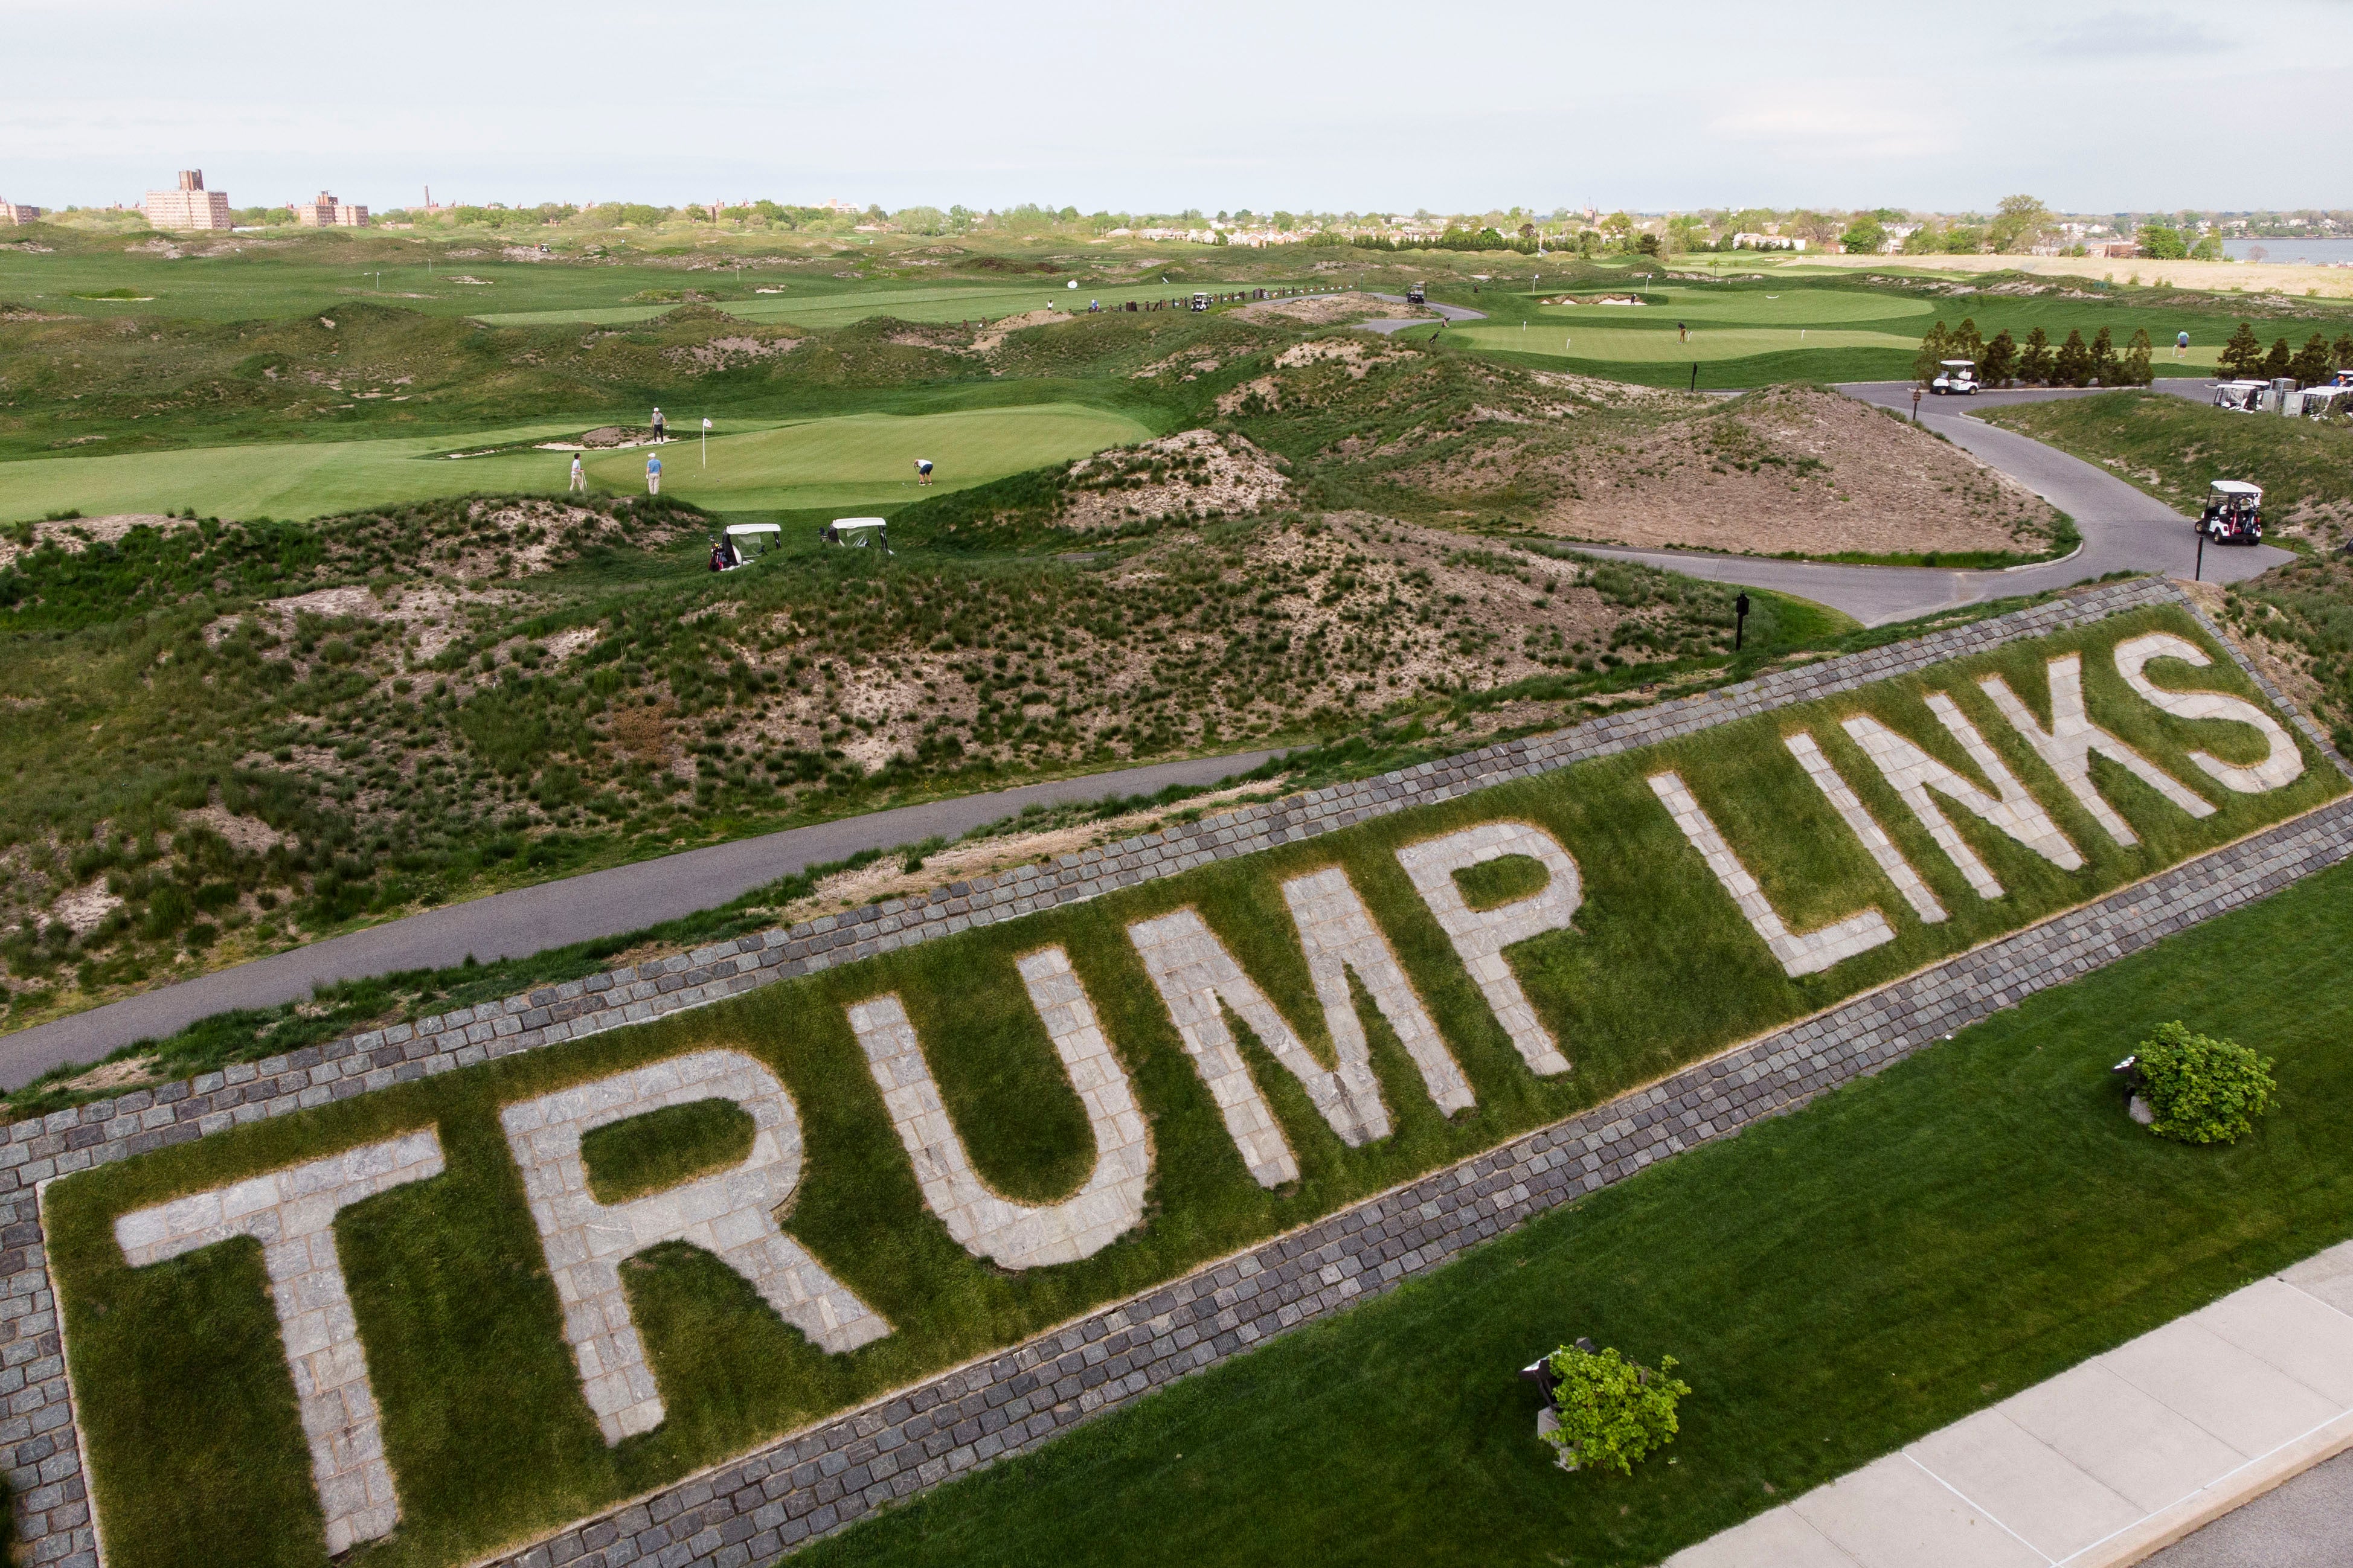 File image: Patrons play the links as a giant branding sign is displayed with flagstones at Trump Golf Links at Ferry Point in the Bronx borough of New York on Tuesday, 4 May, 2021